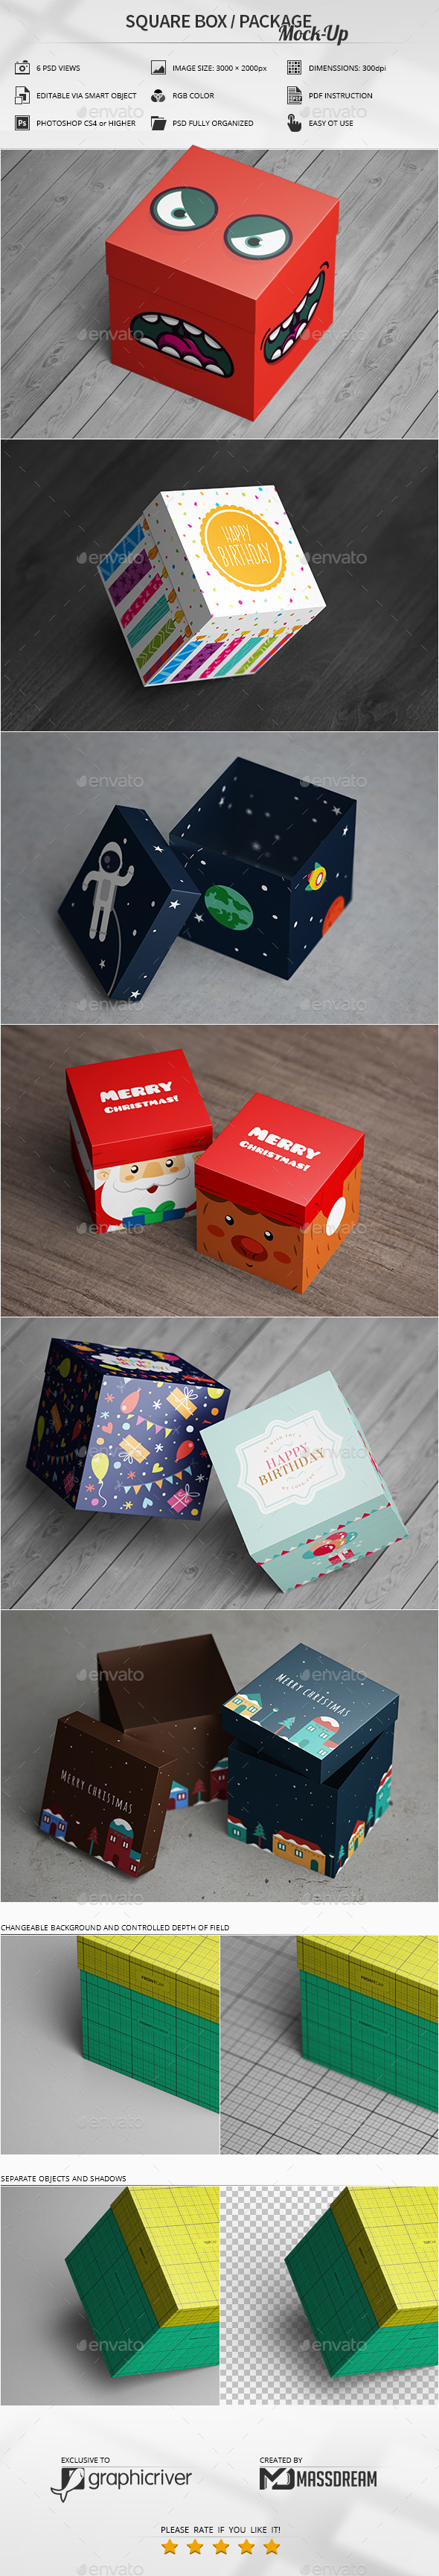 Square Box / Package Mock-Up